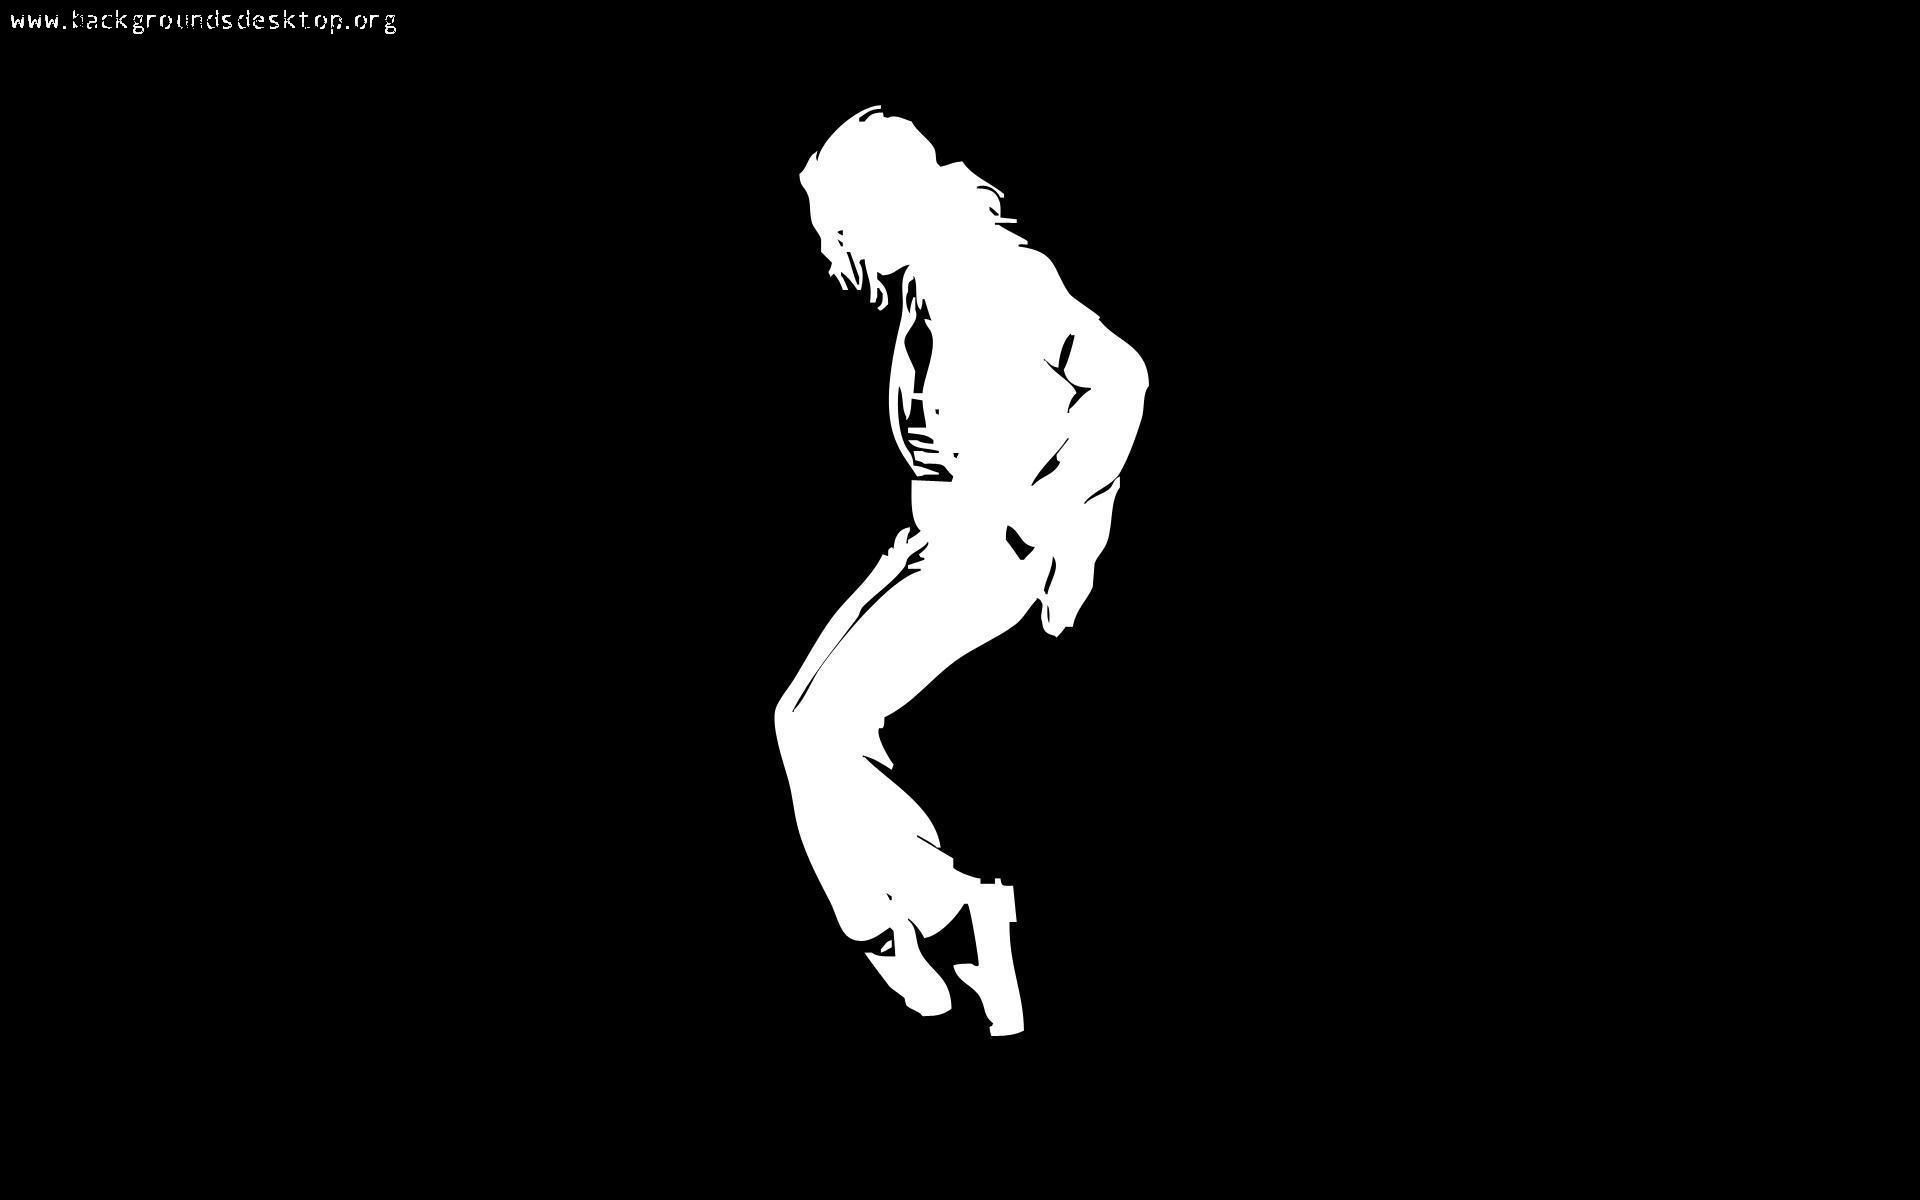 Michael Jackson Wallpapers Full Hd Wallpaper Search Page 2 | HD ...